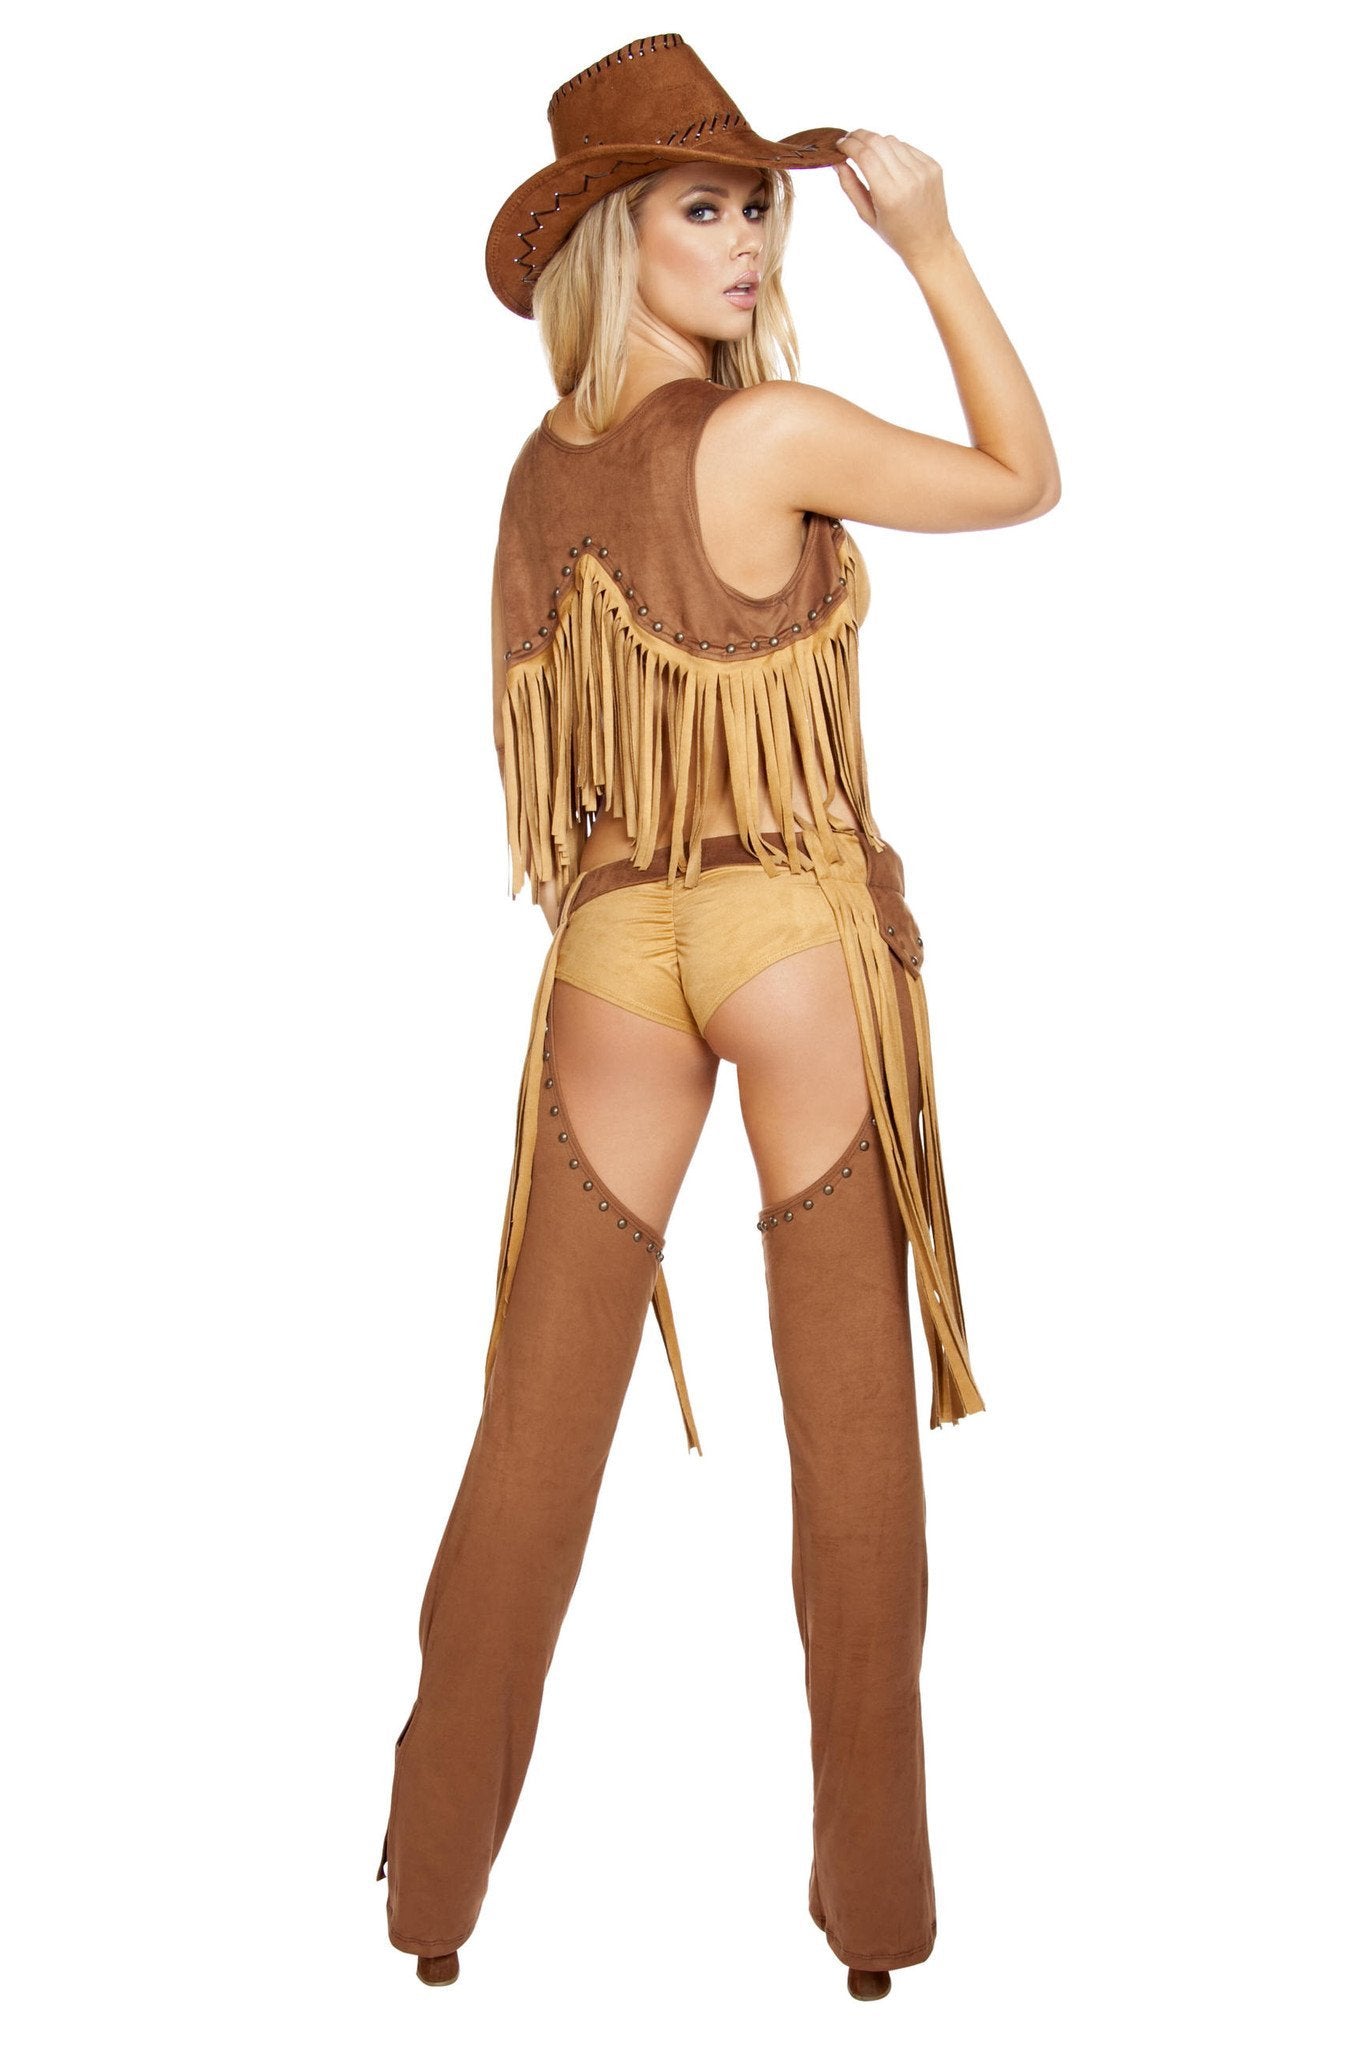 Buy 5pc Wild Western Temptress Cowgirl Costume from RomaRetailShop for 129.99 with Same Day Shipping Designed by Roma Costume, Inc. 4584-AS-M/L